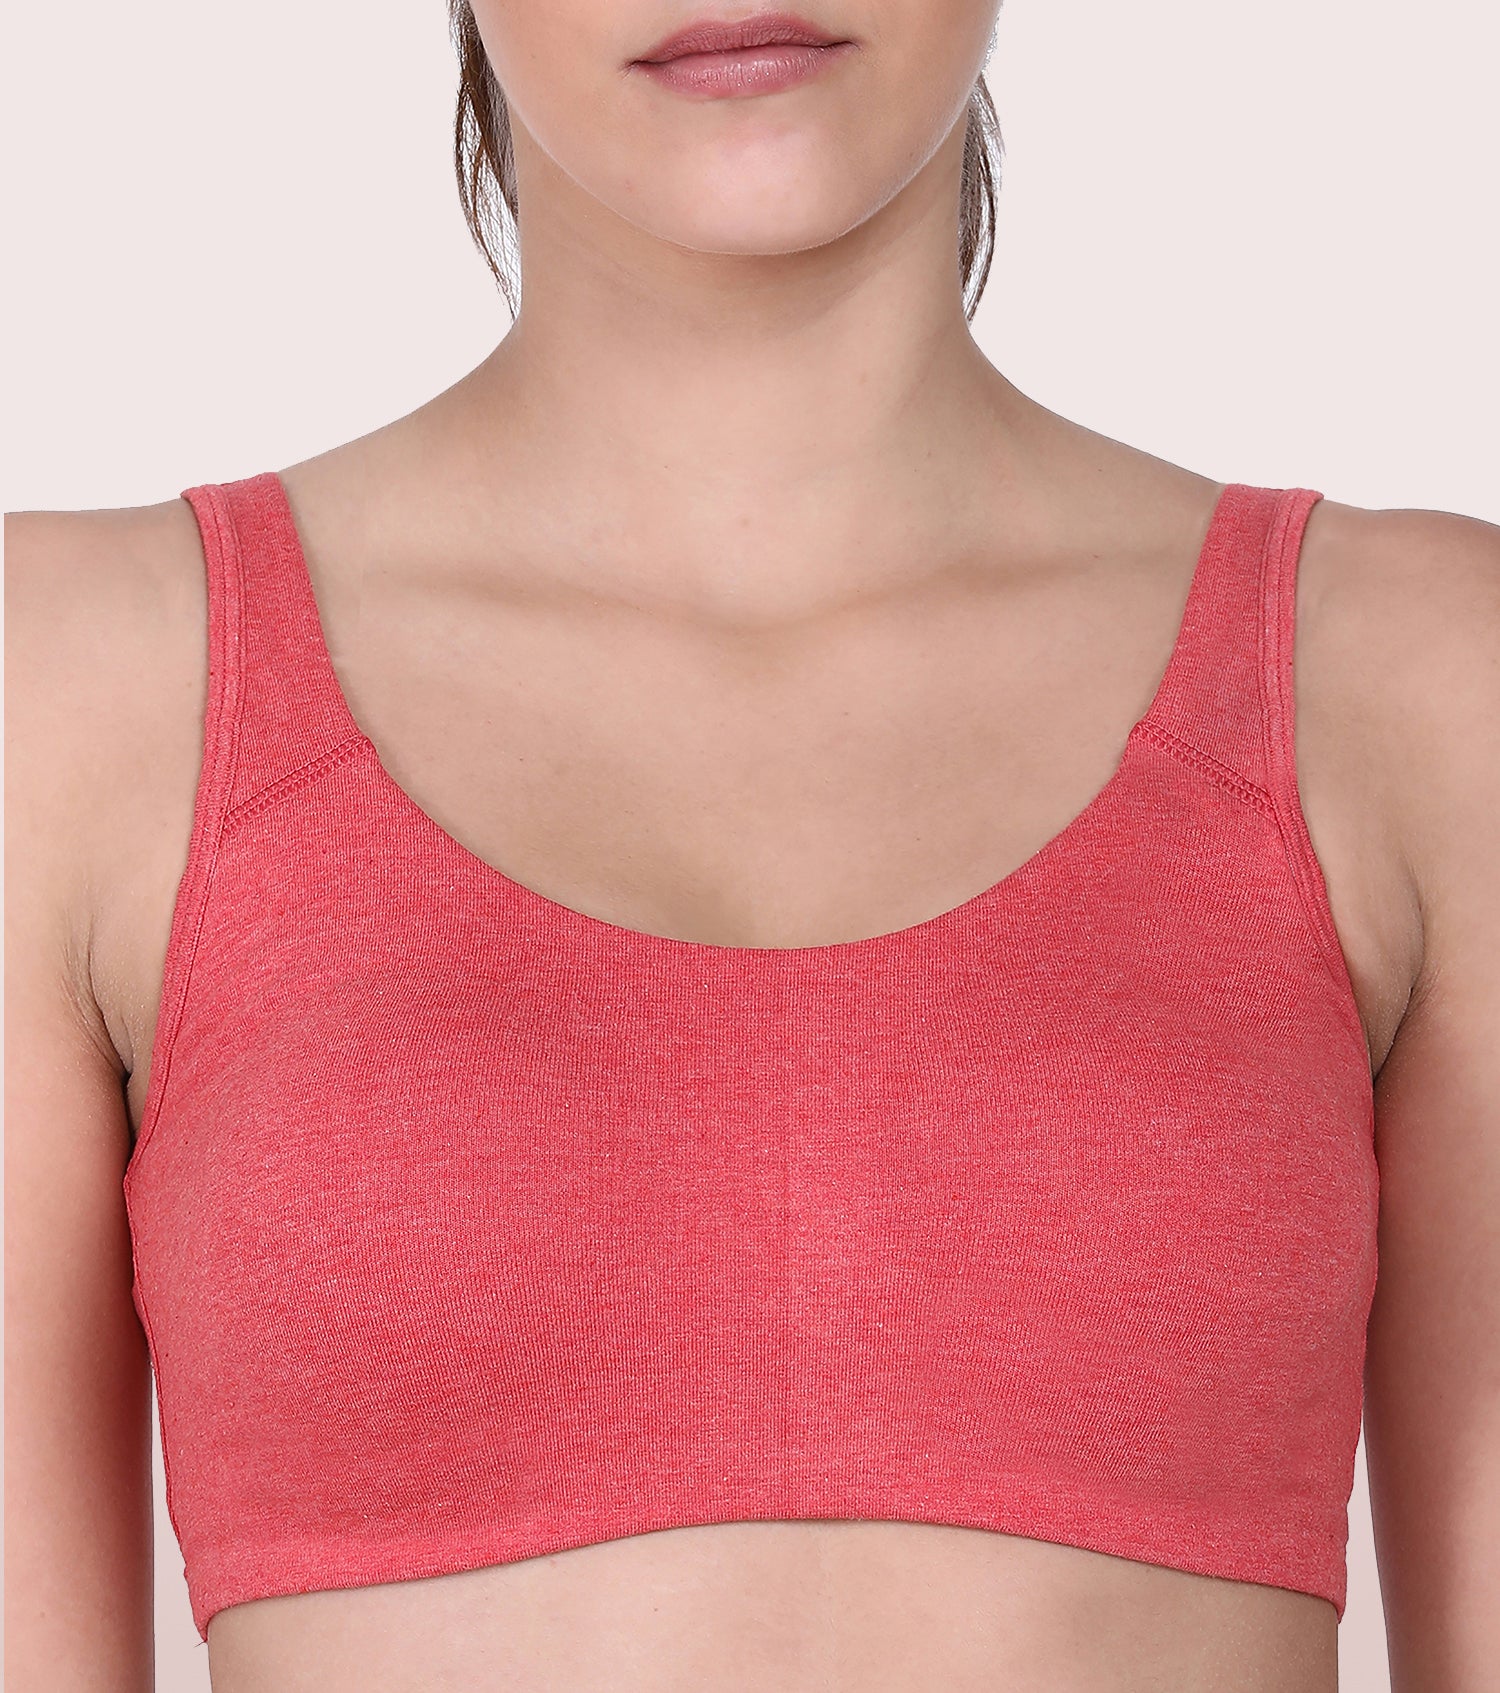 Enamor SB06 Low Impact Cotton Sports Bra - Non-Padded Wirefree - Skin XL in  Ahmedabad at best price by Krishna Emporium - Justdial